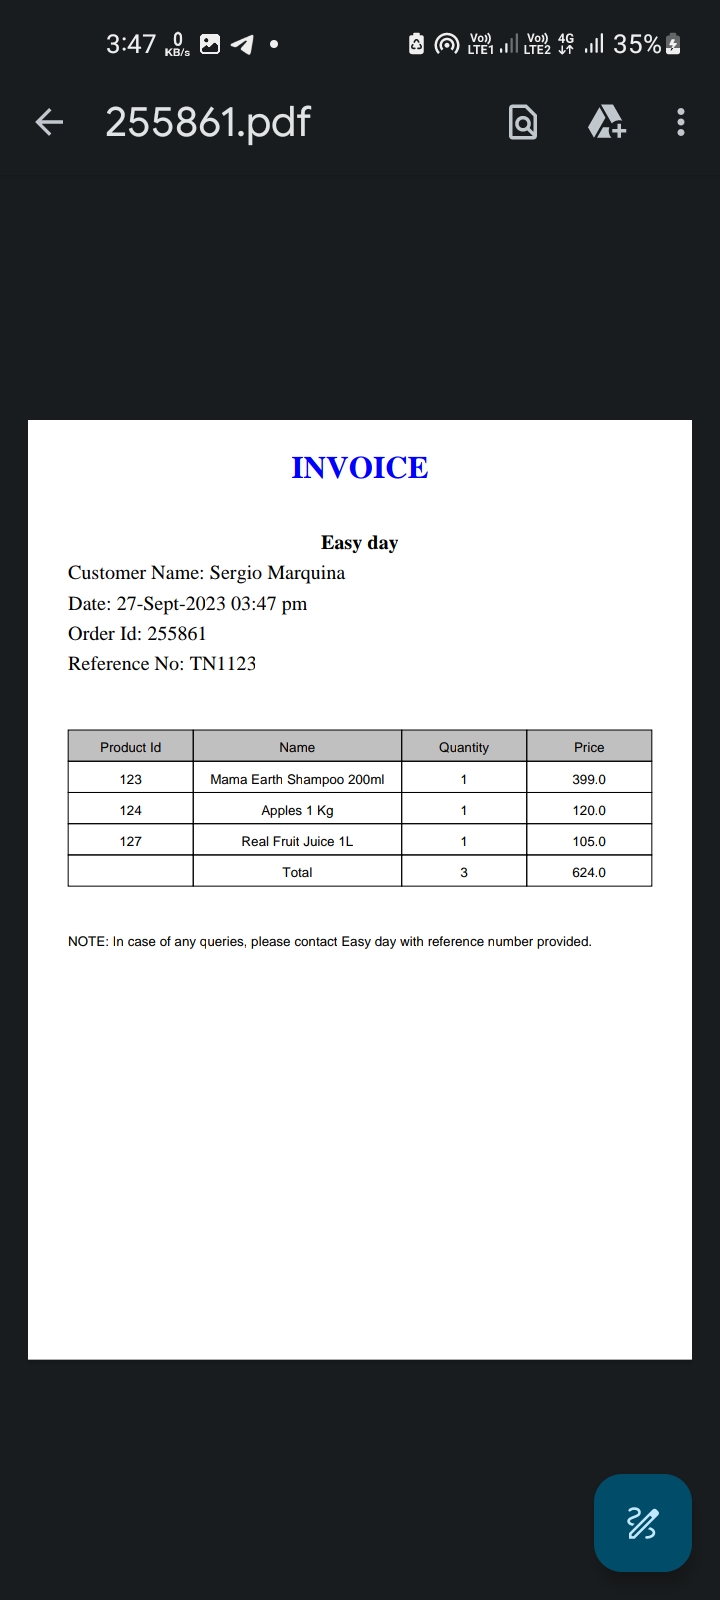 Invoice Downloaded to user device